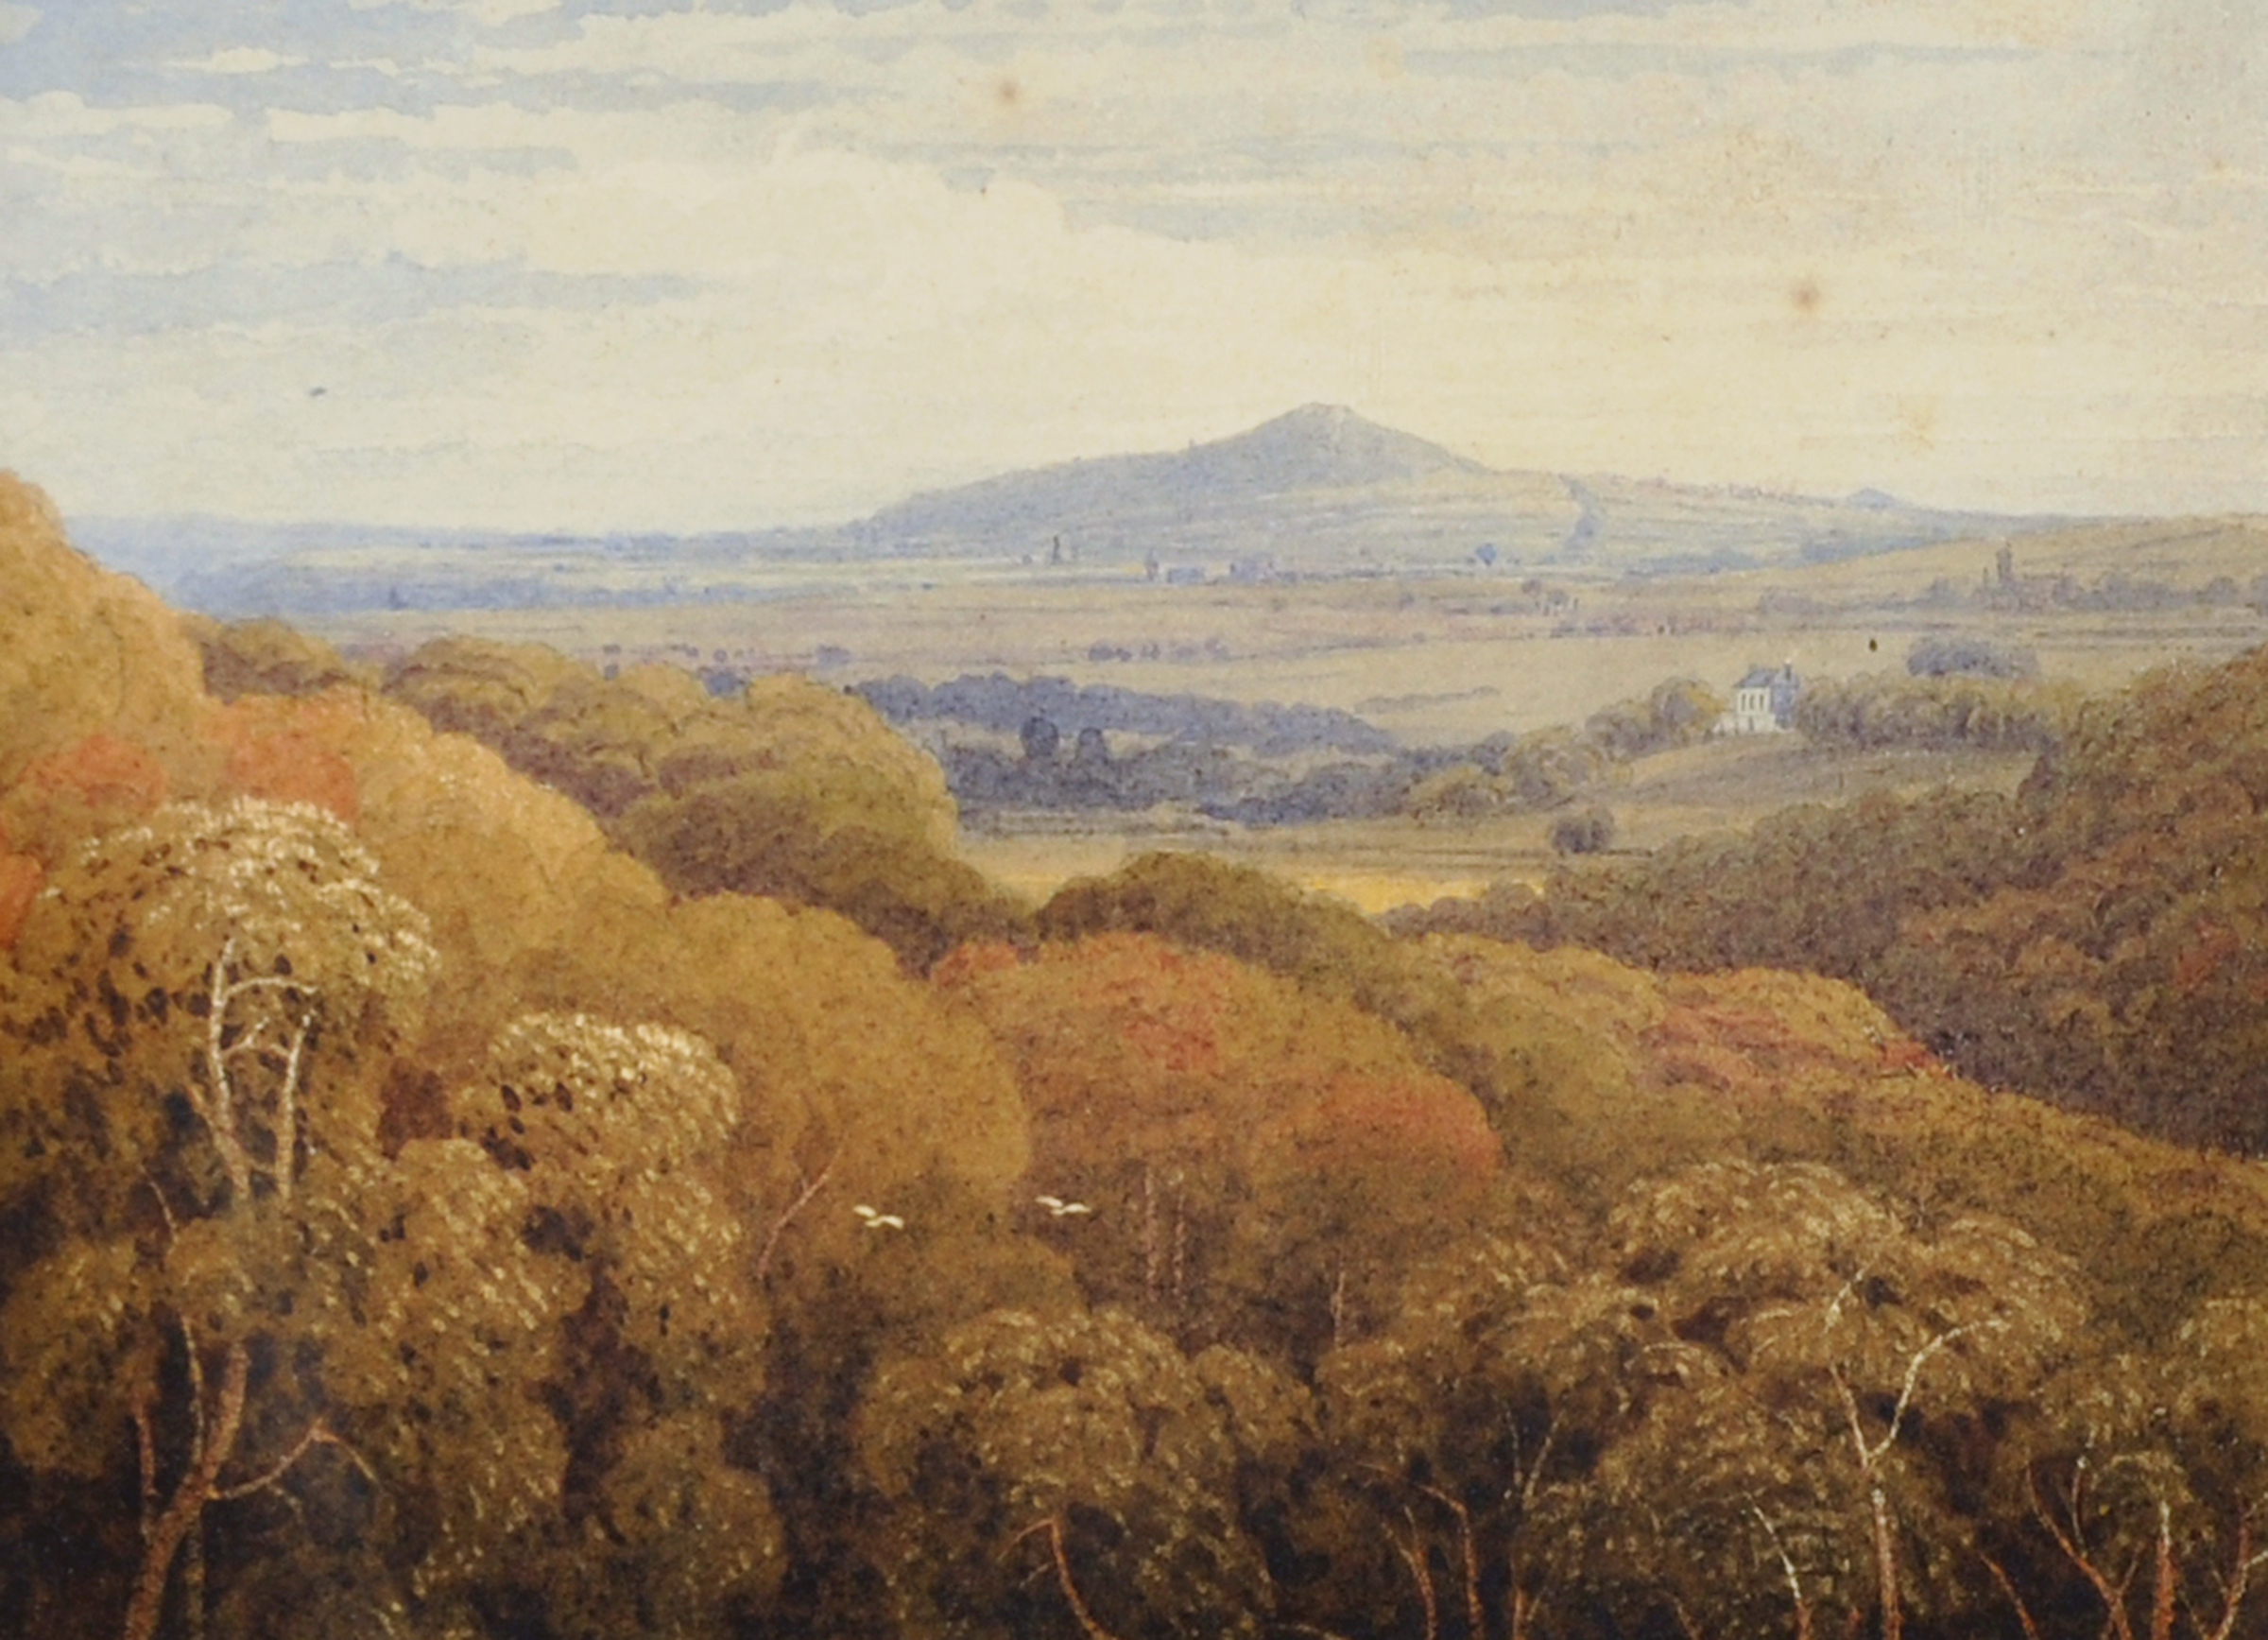 George Fennel Robson (1788-1833) British. "The Wrekin and Ercall Hill", an Extensive Landscape,